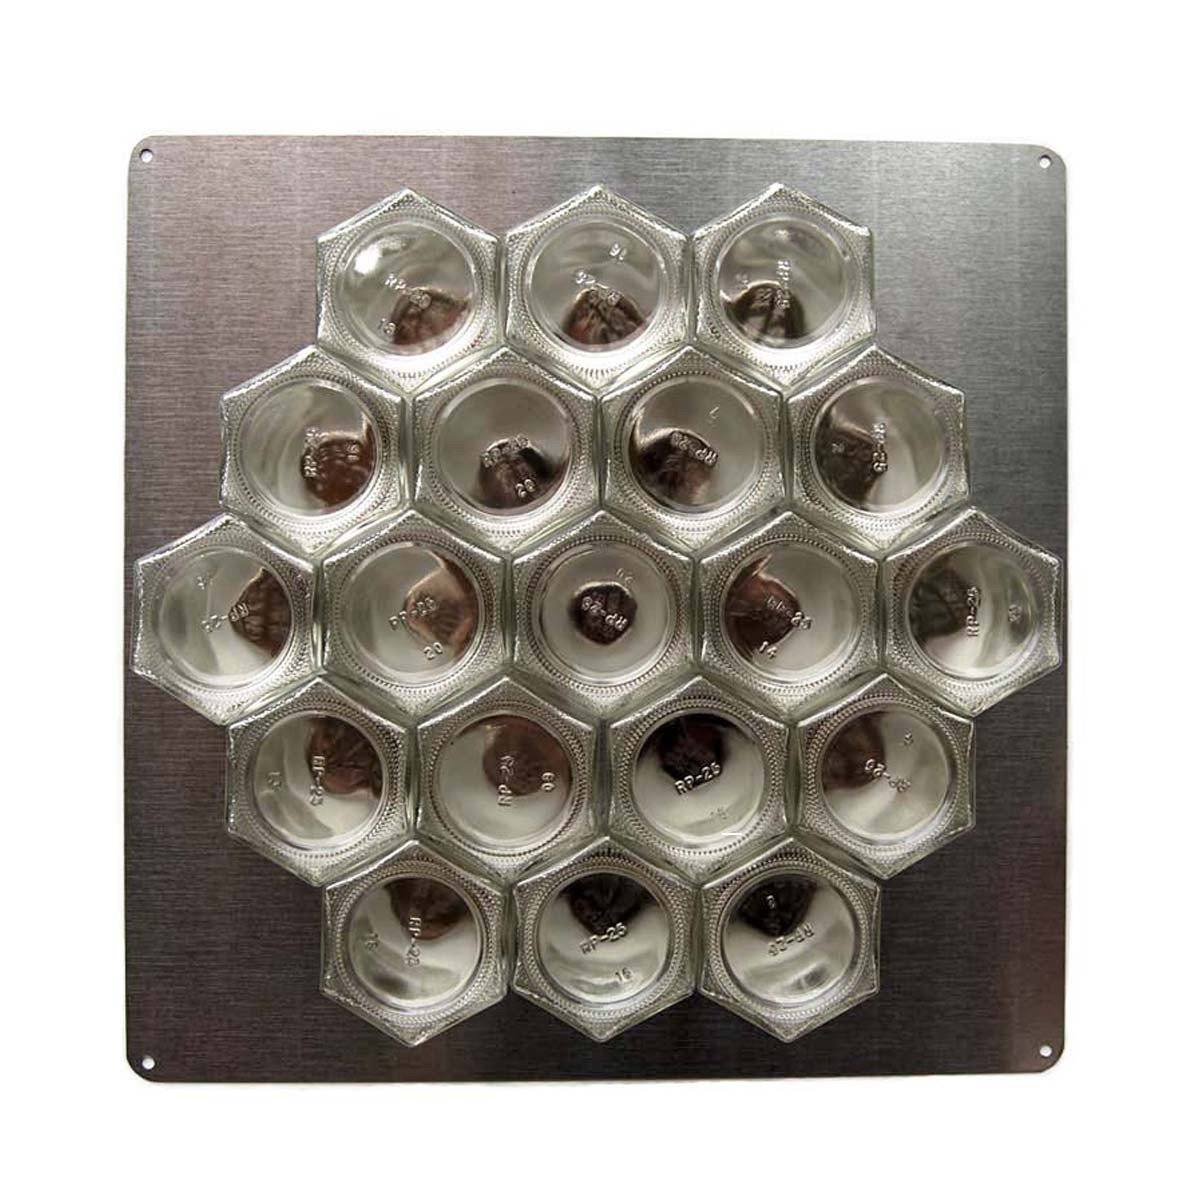 24 Large Empty Jars | Magnetic Spice Rack with Wall Base 20x10